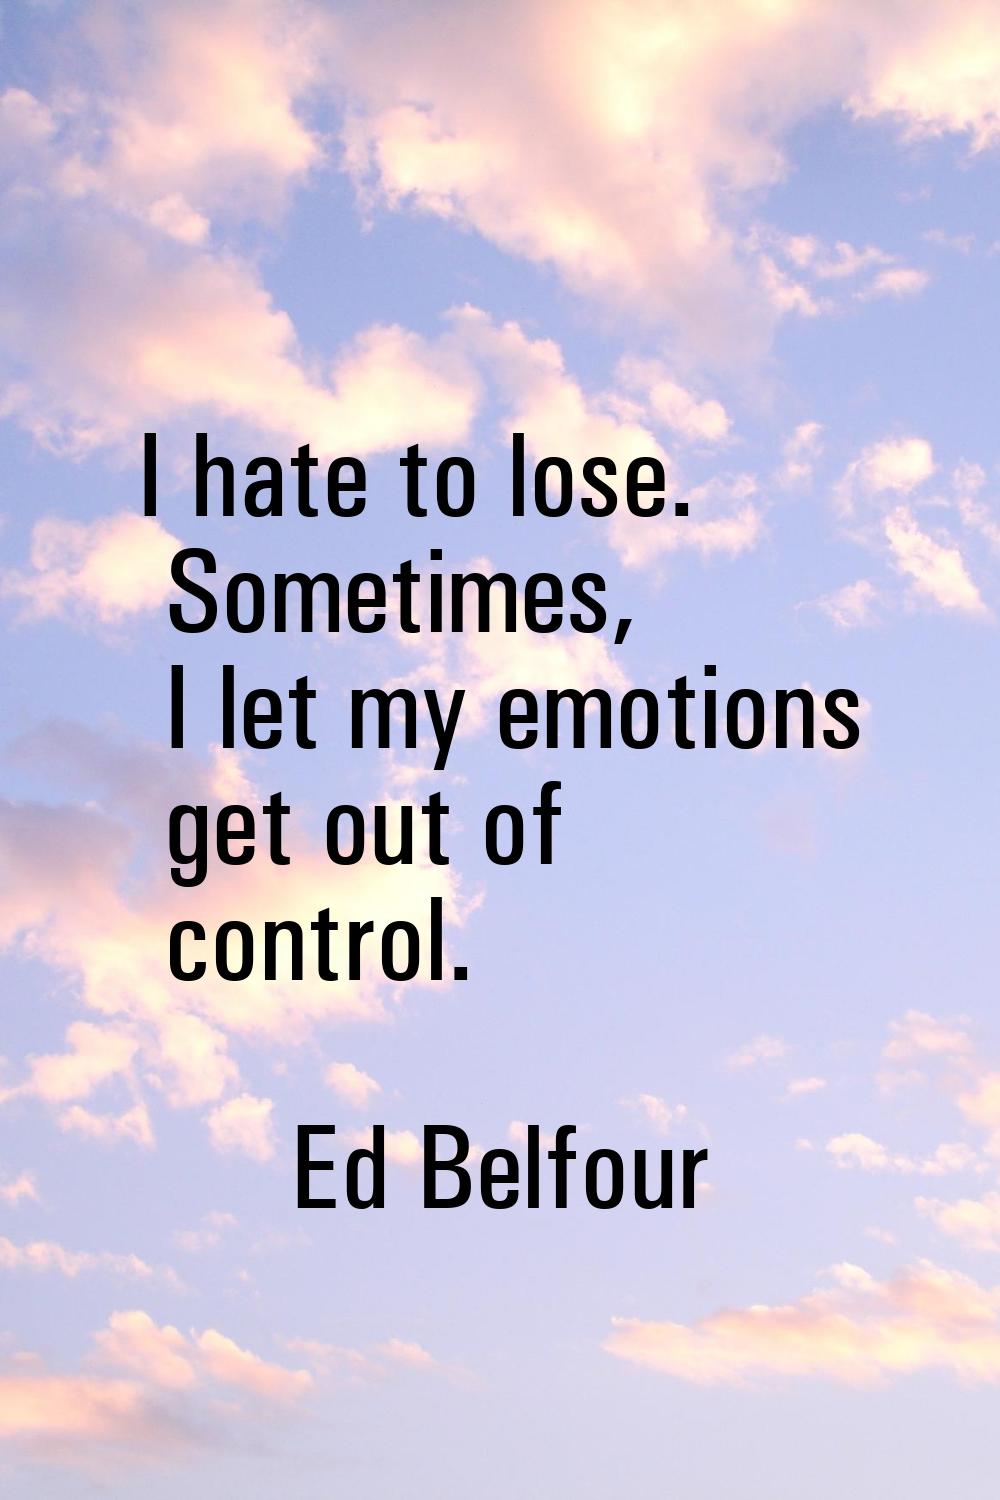 I hate to lose. Sometimes, I let my emotions get out of control.